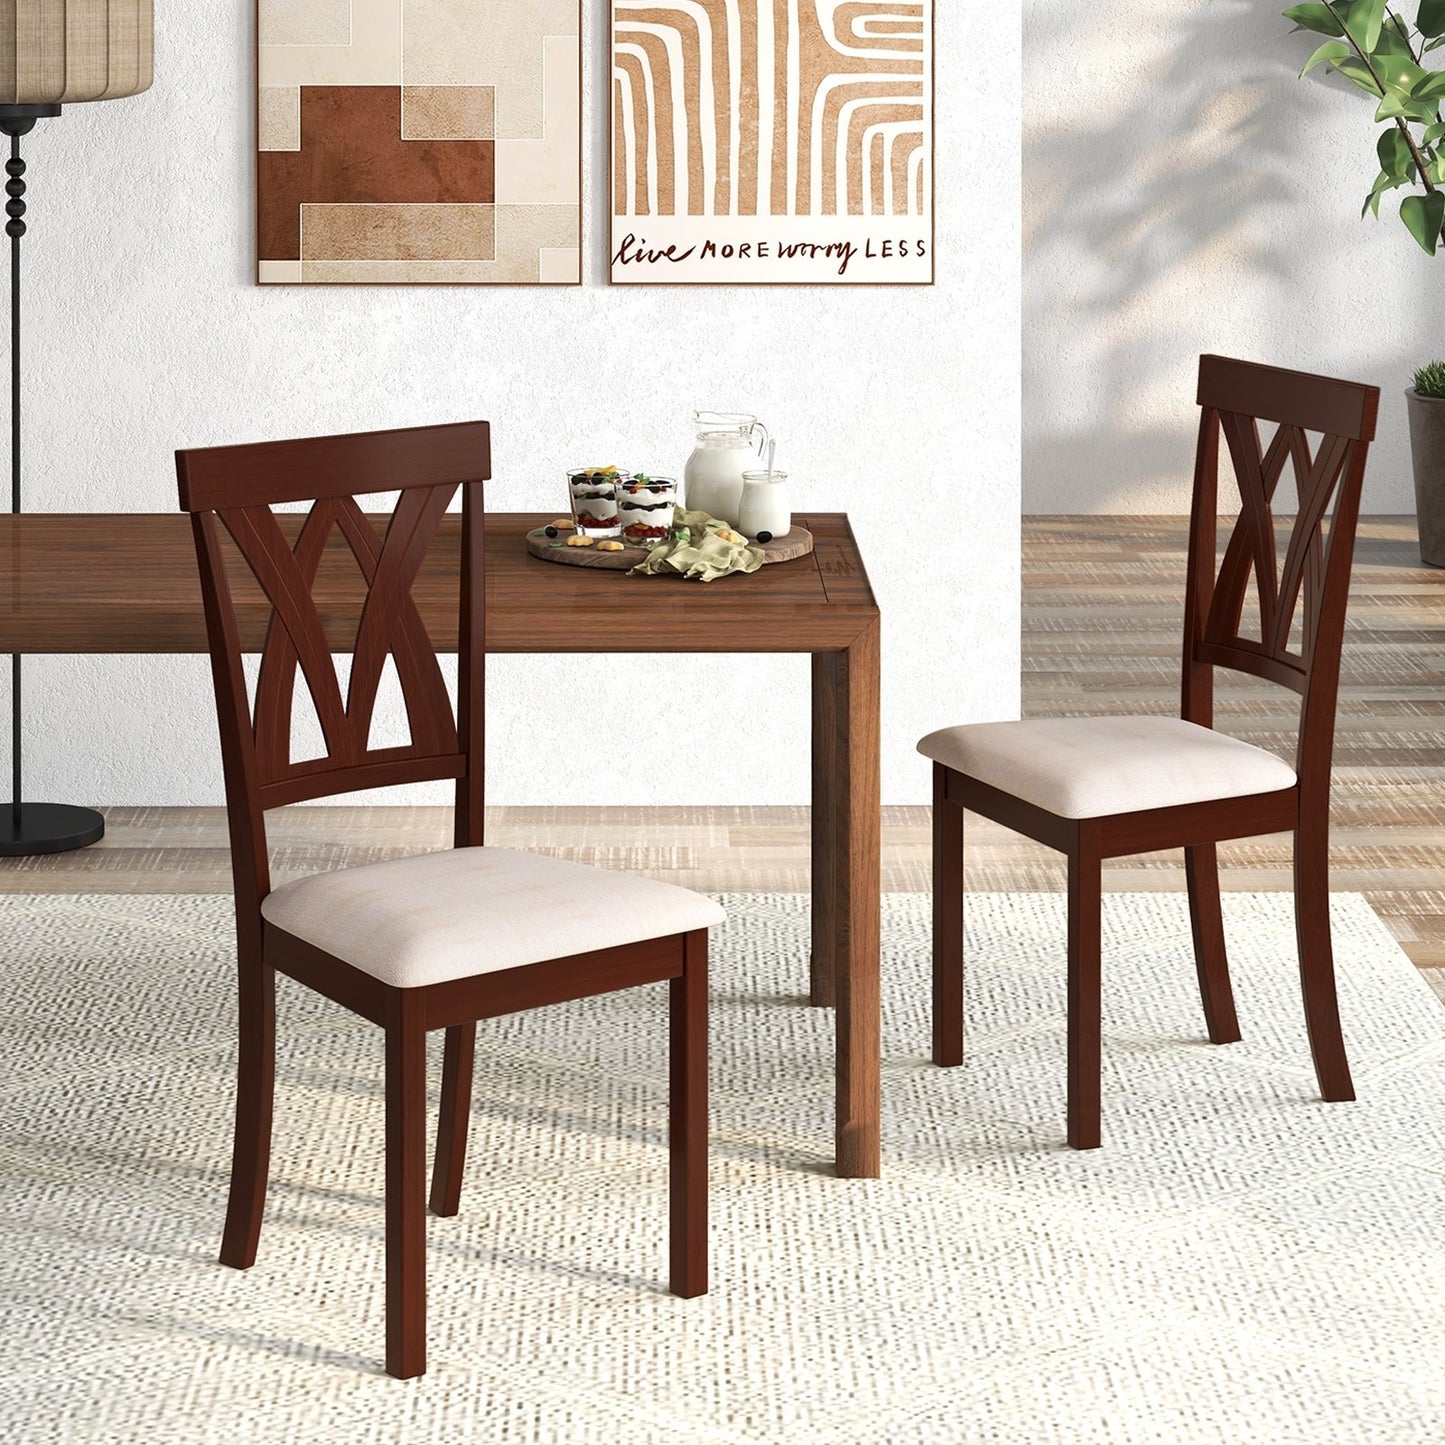 Set of 2 Wood Kitchen Chairs with Faux Leather Upholstered Seat, Beige